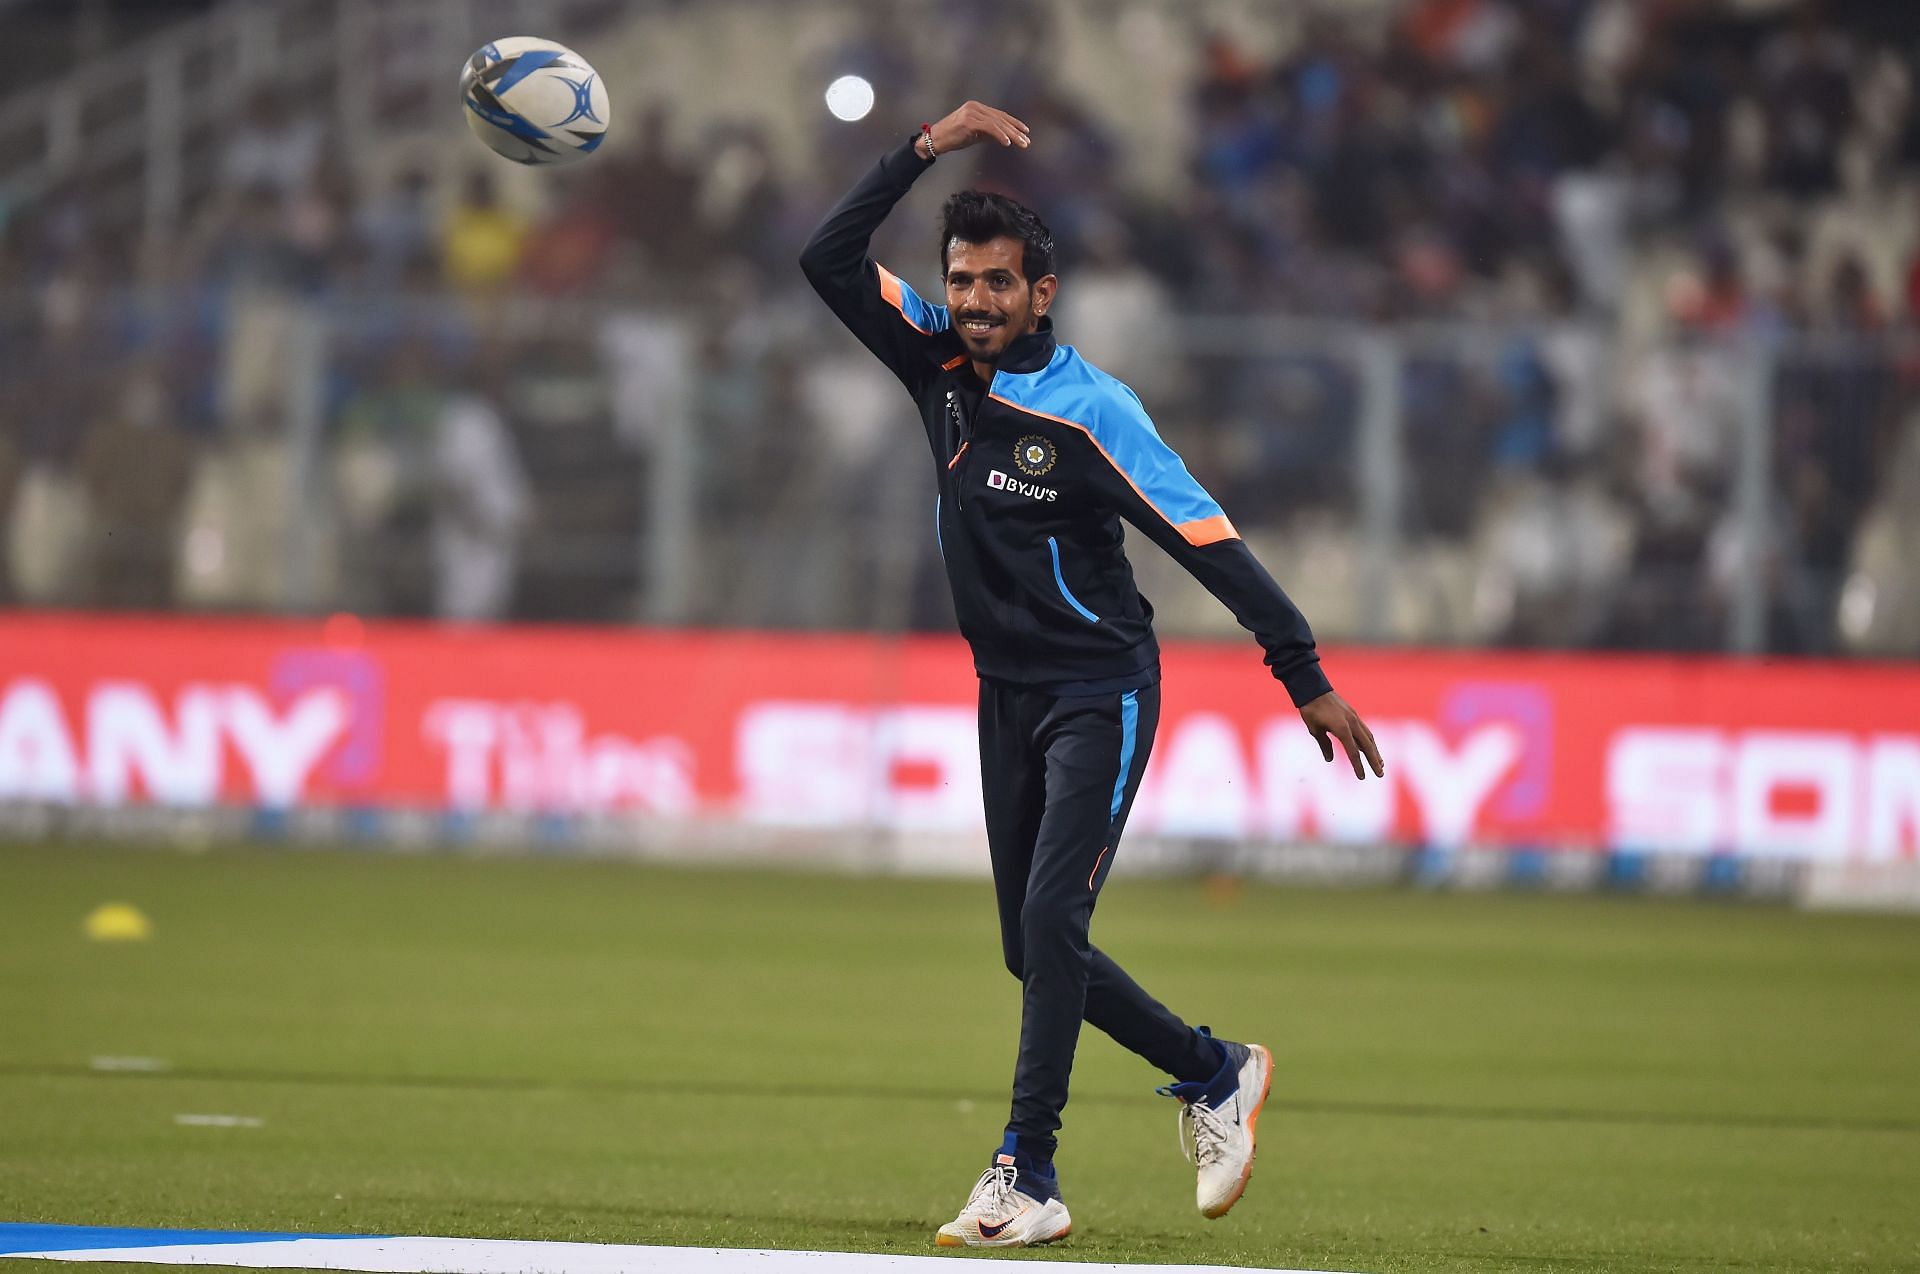 India needs a solid performance from Chahal